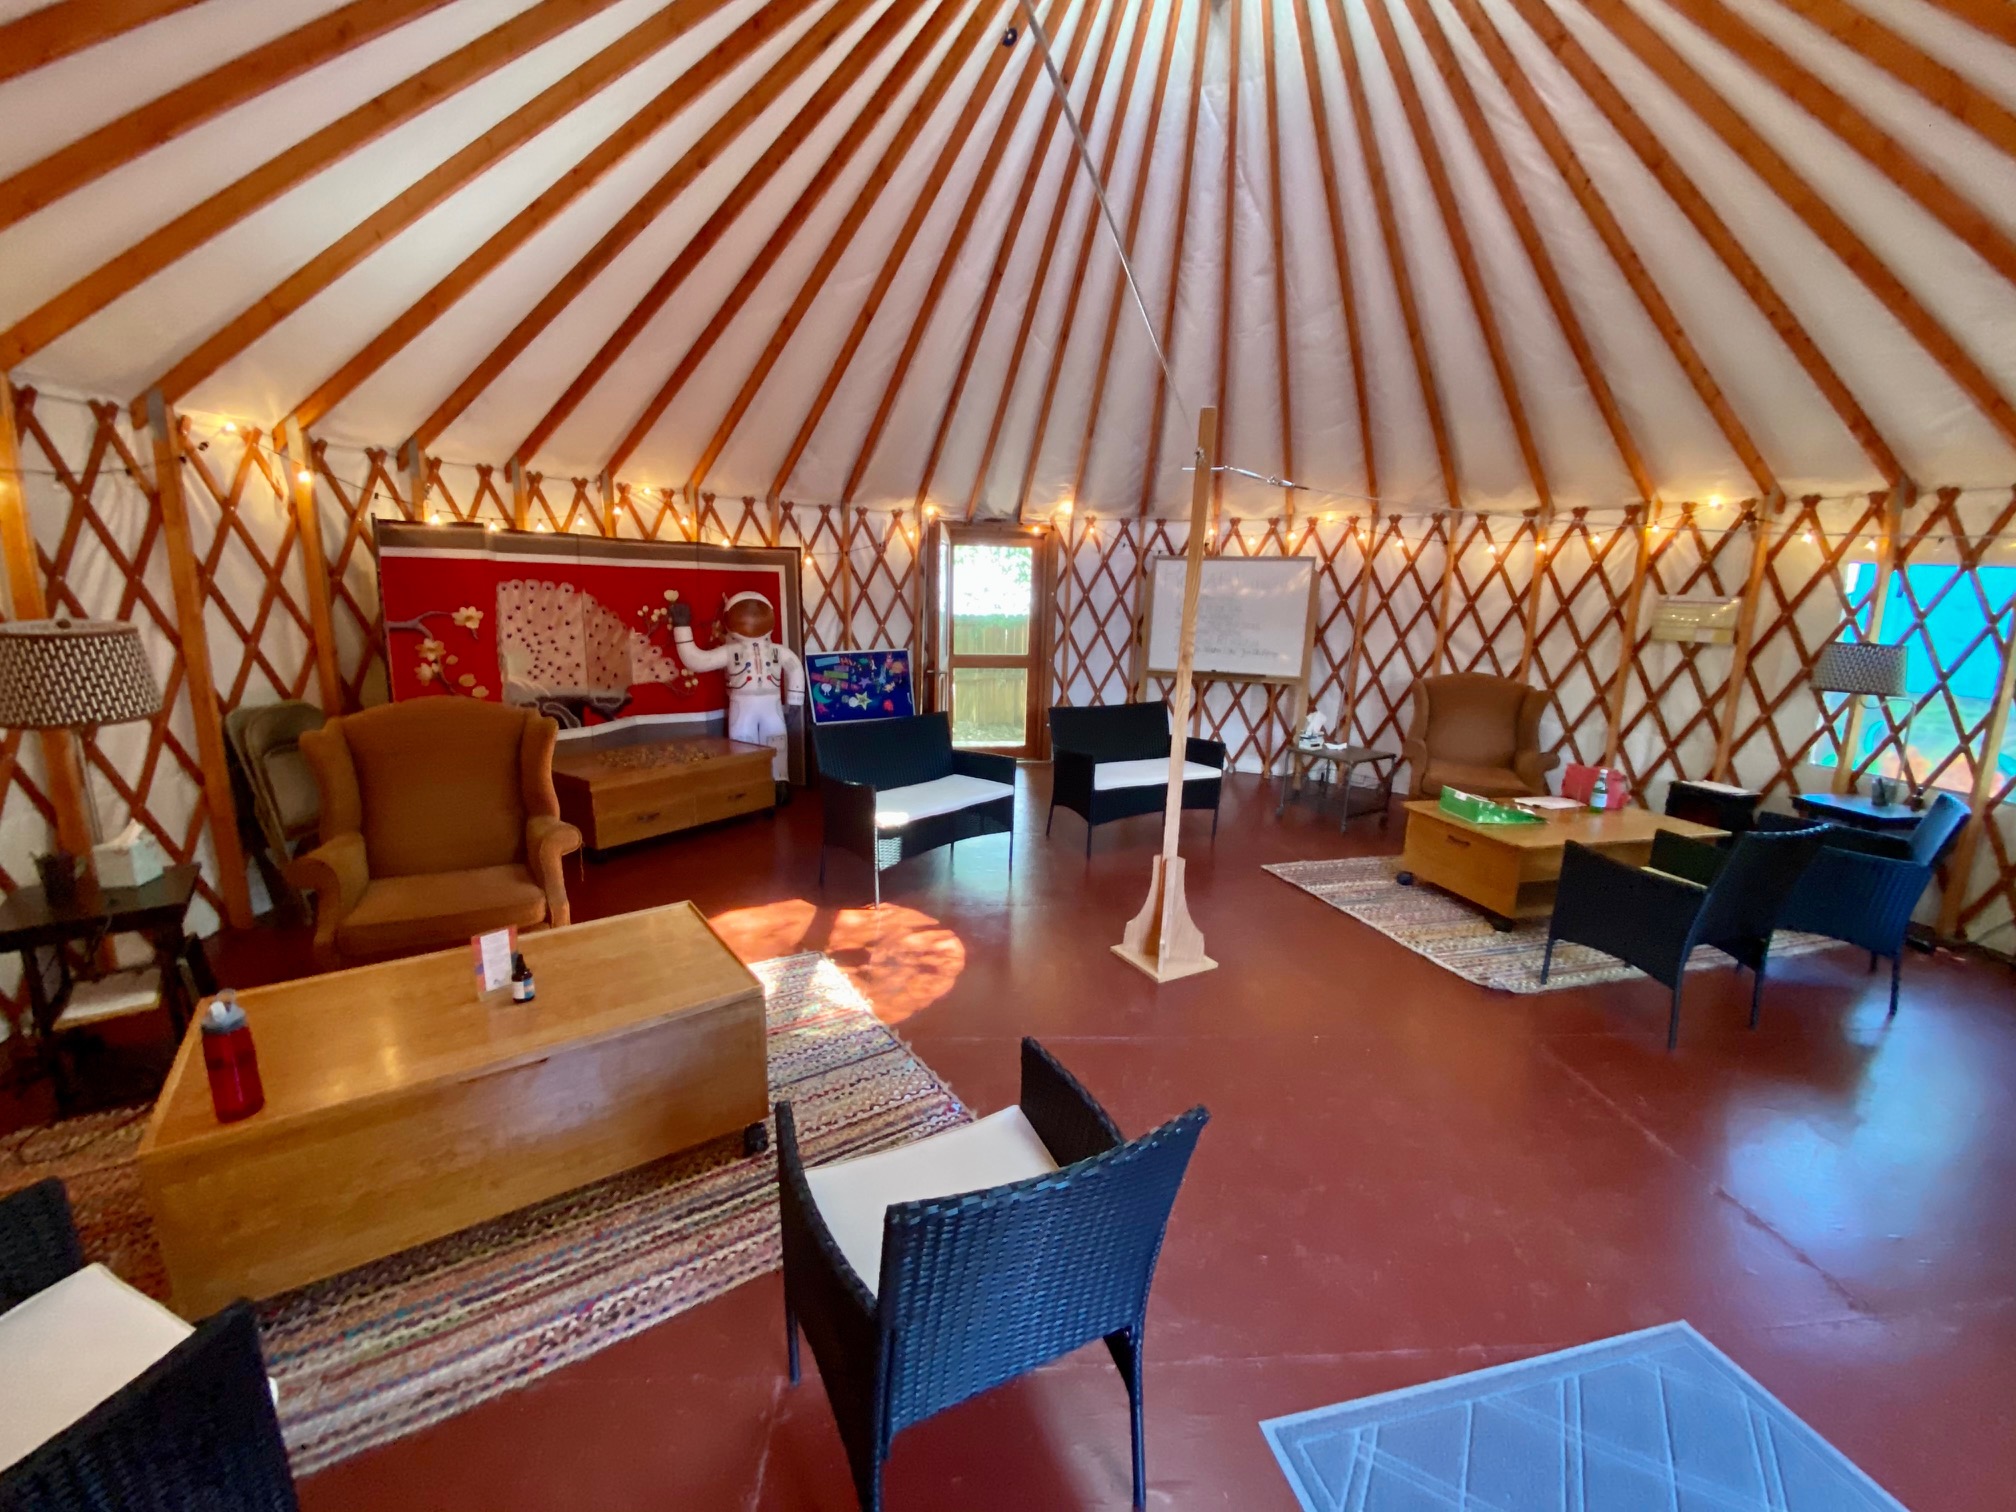 The inside of the yurt. 